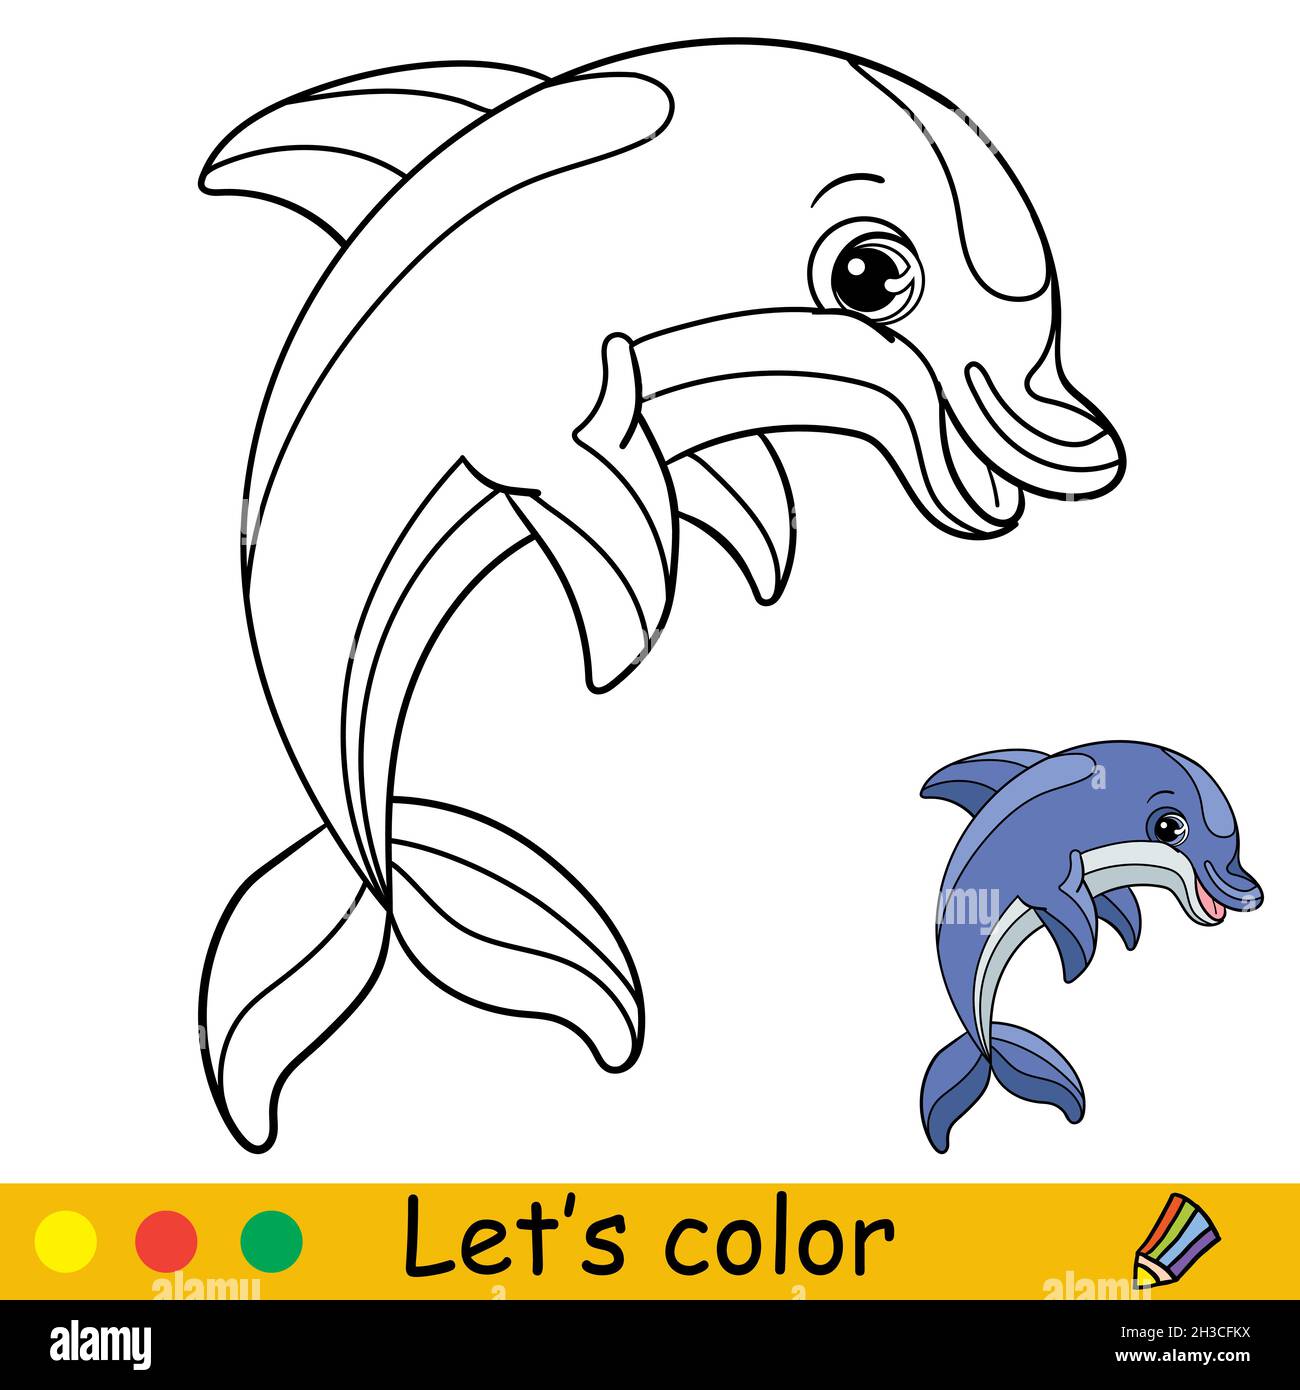 Mother Dolphin and Baby Dolphin Coloring Page - Stock Illustration  [97925599] - PIXTA